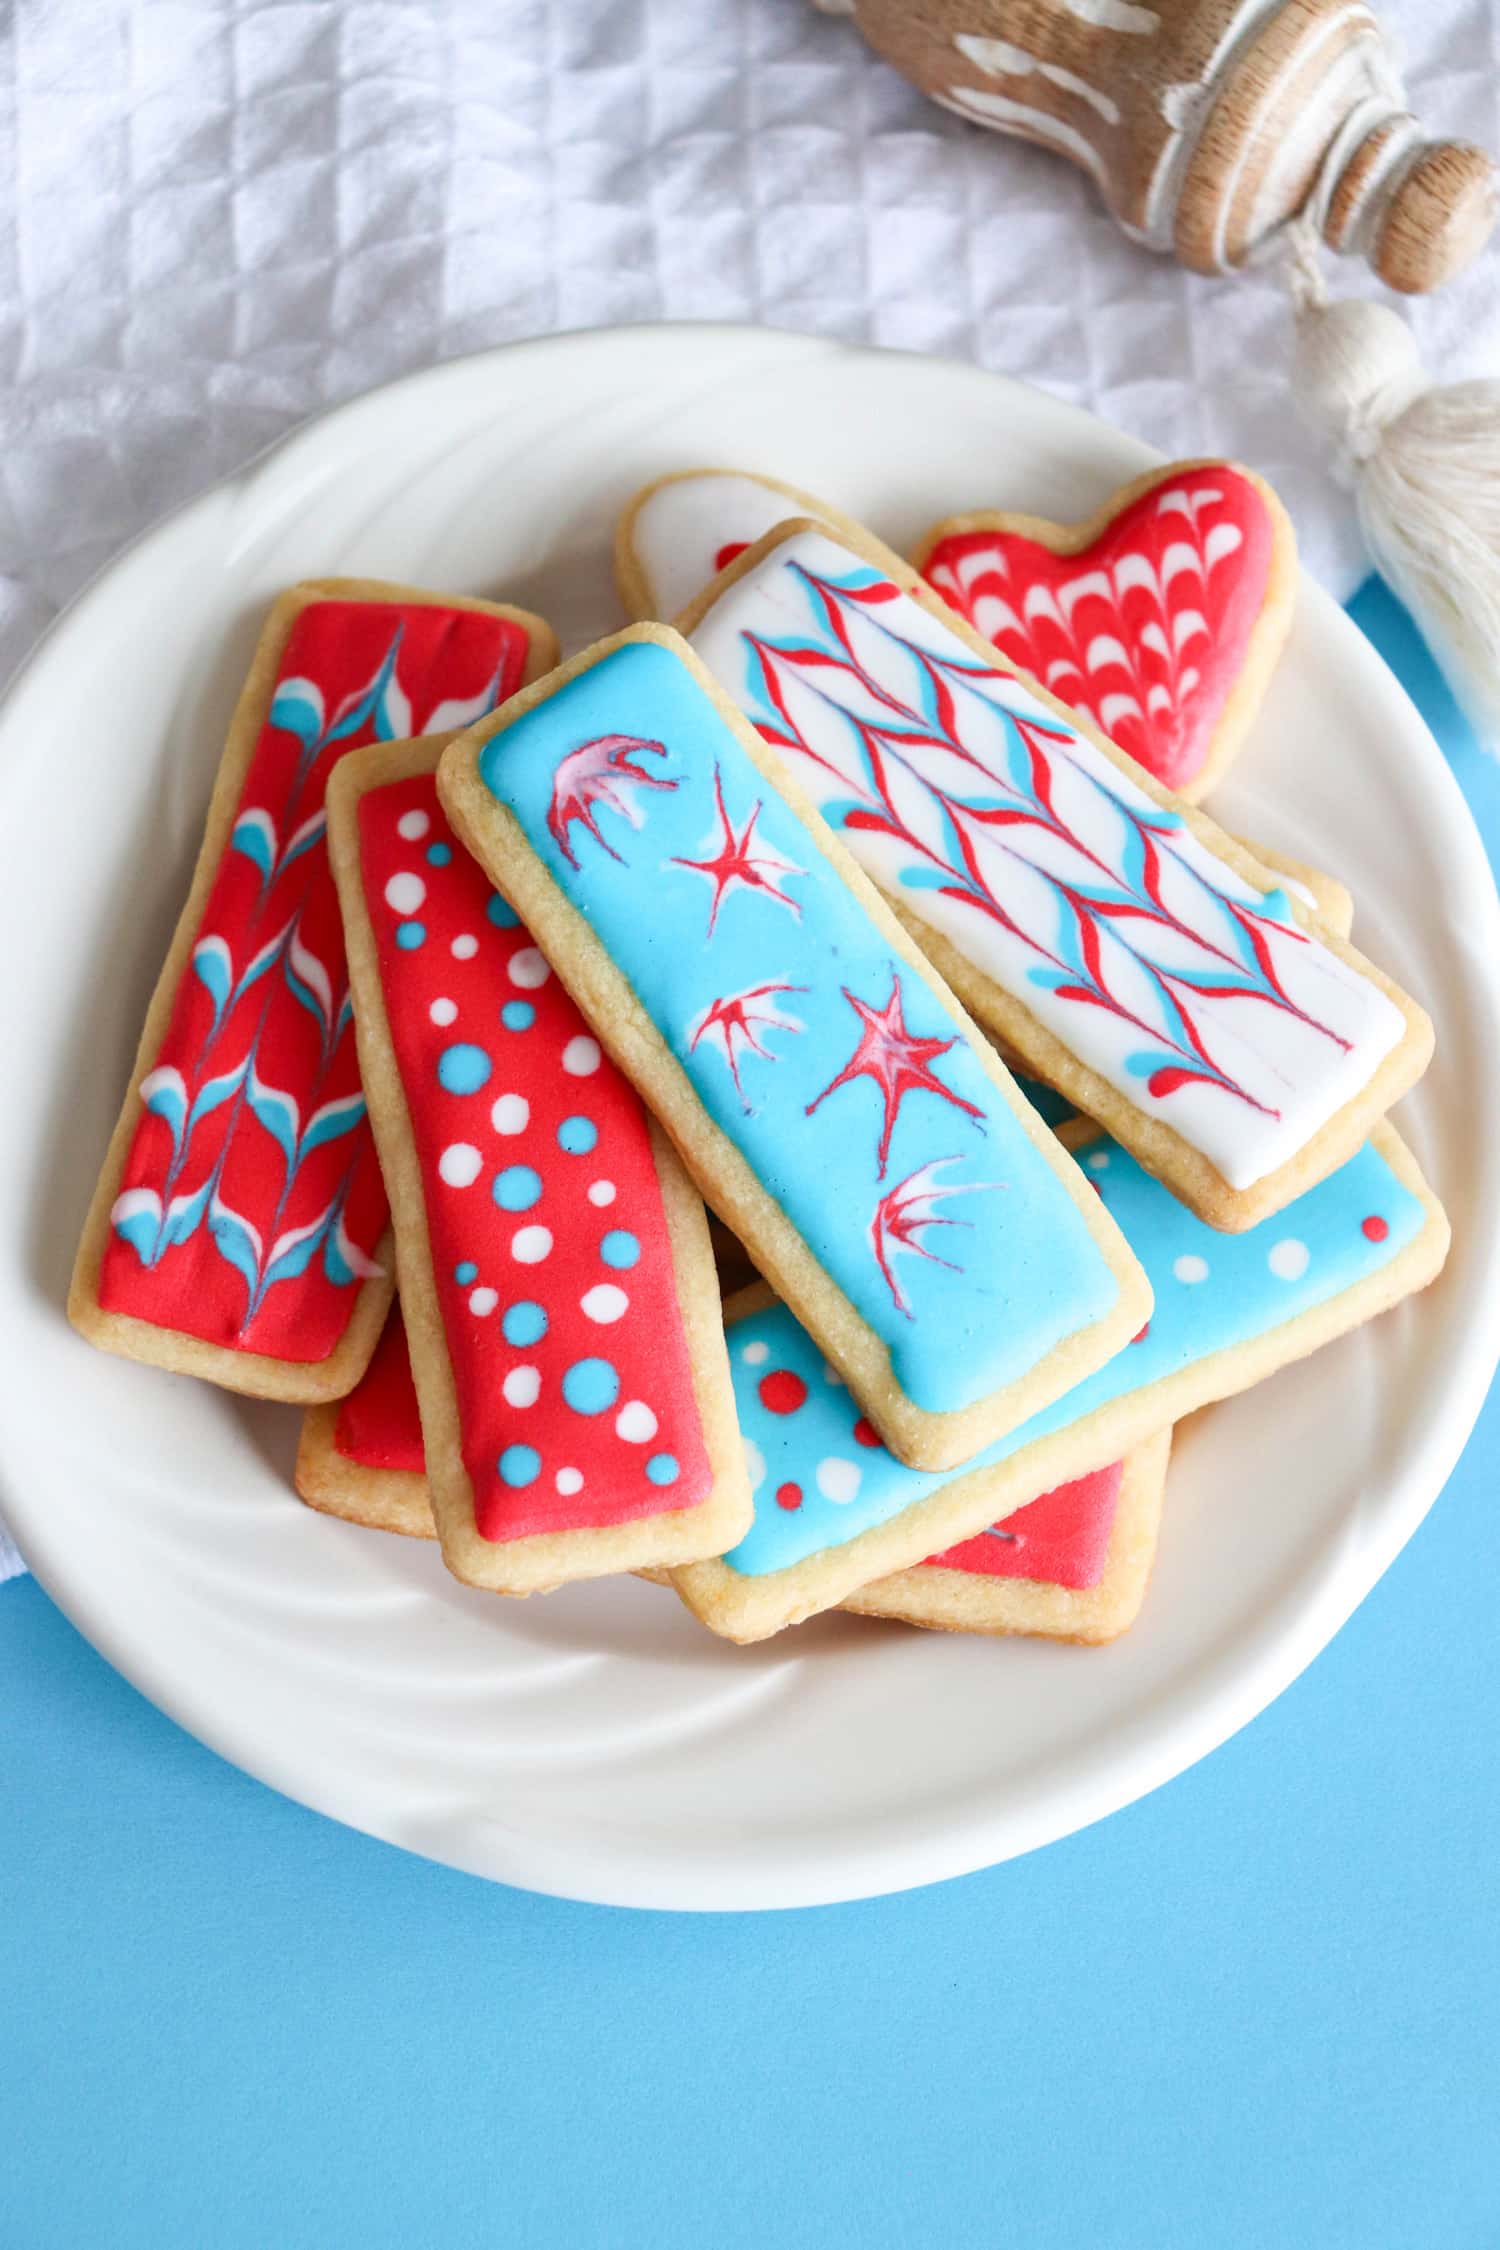 Easy 4th of July Cookies